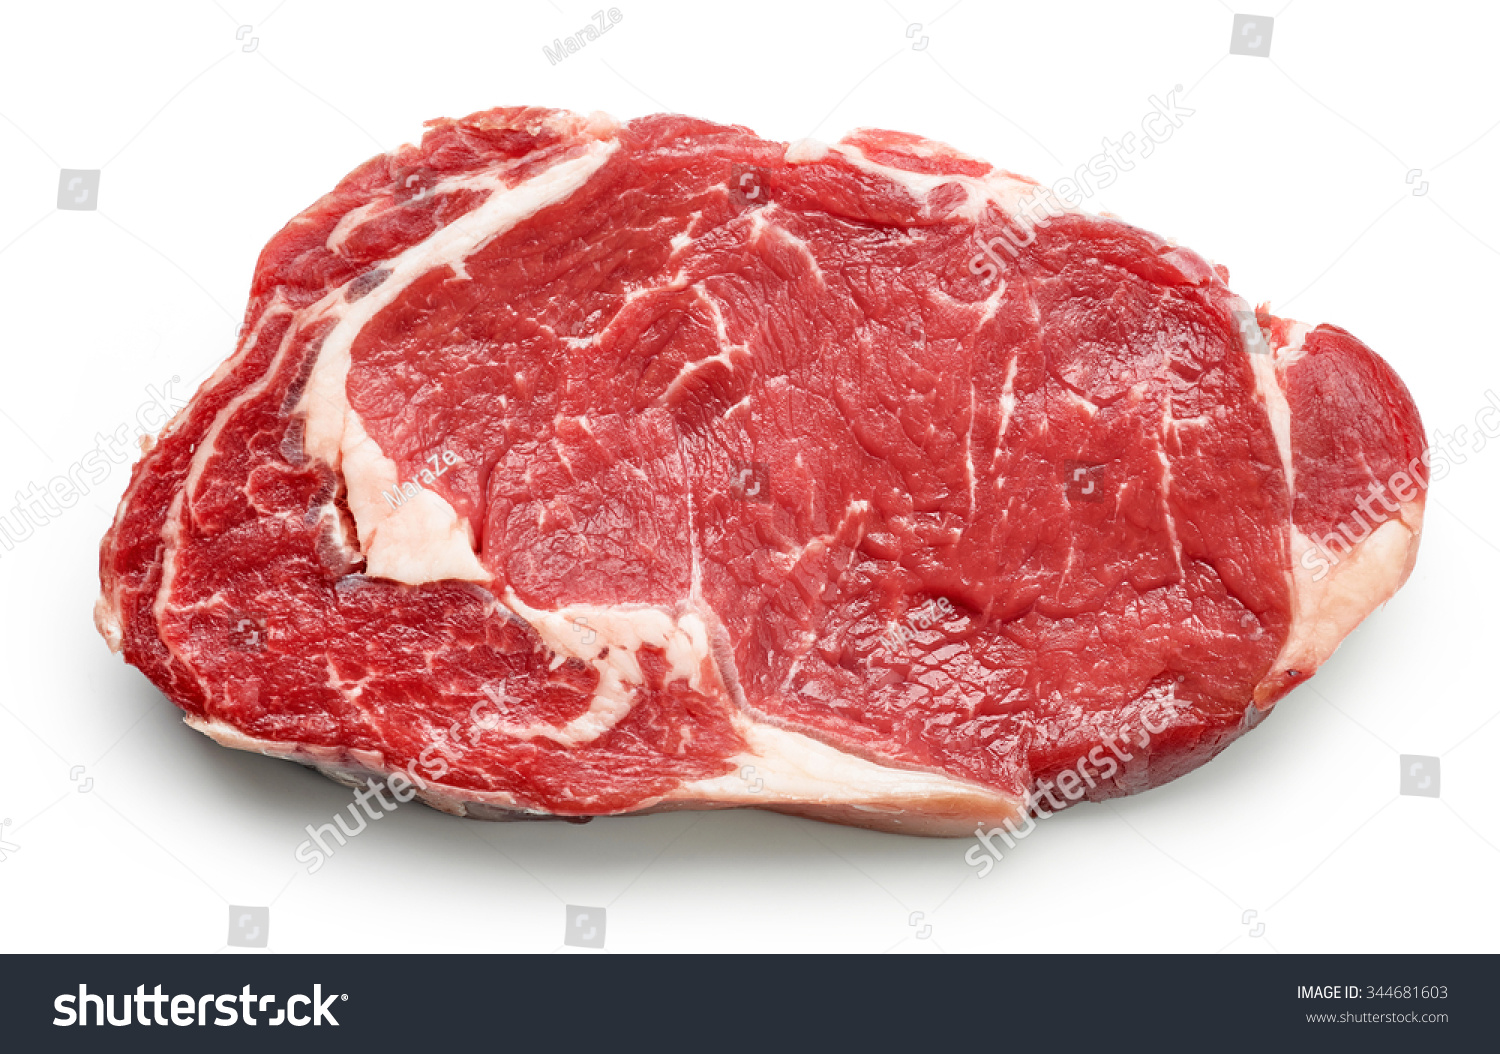 fresh raw beef steak isolated on white background, top view #344681603